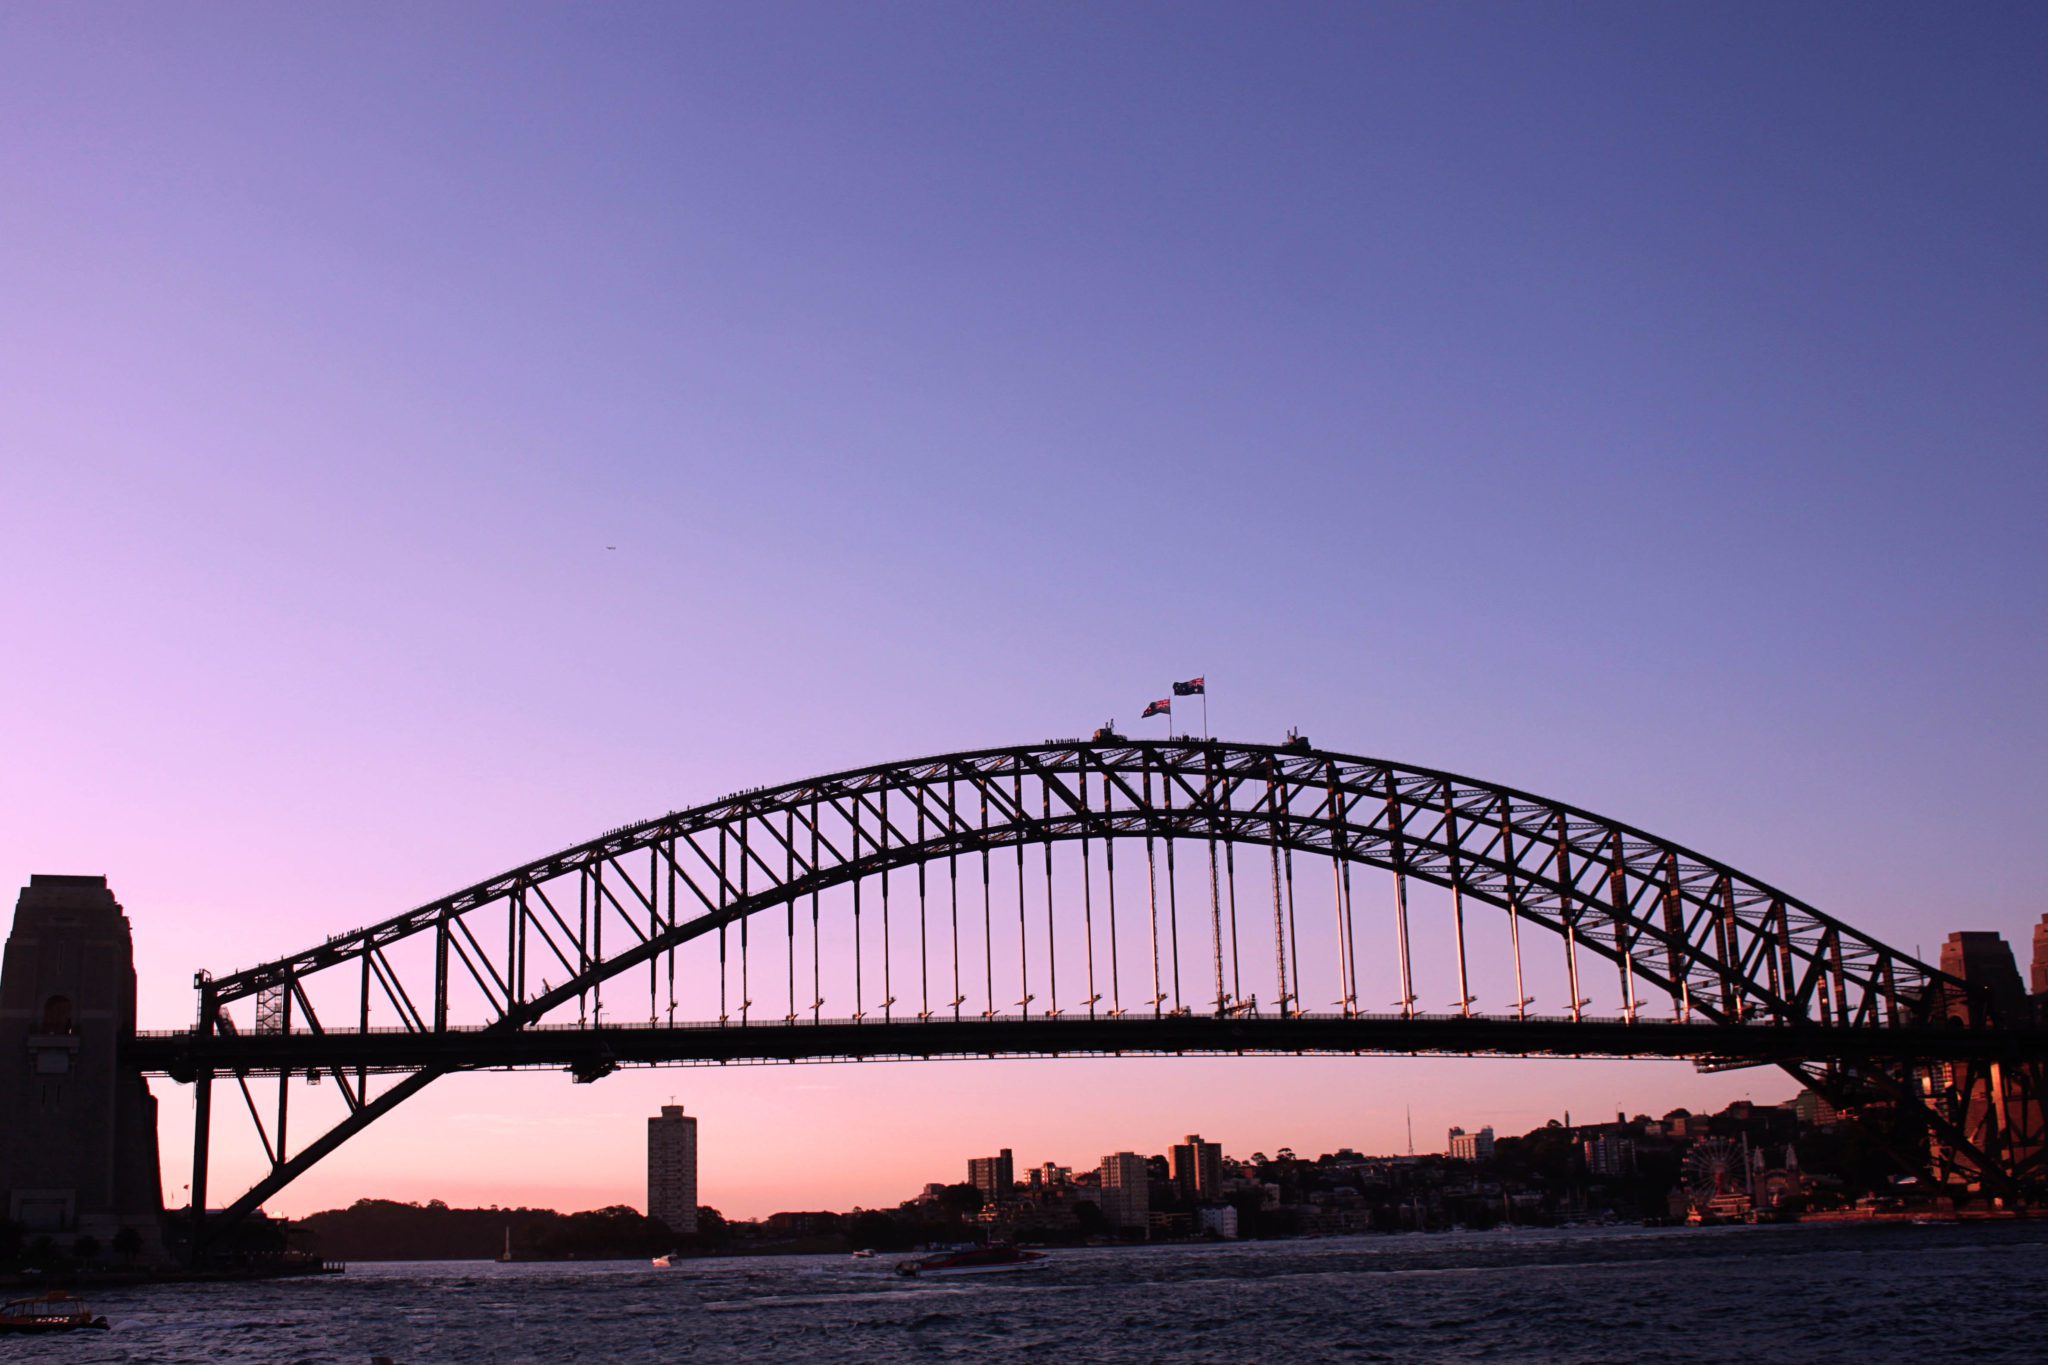 Tips for visiting the Sydney Harbour Bridge- Top 10 things to do in Sydney #sydney #australia #sydneyharbourbridge #simplywander